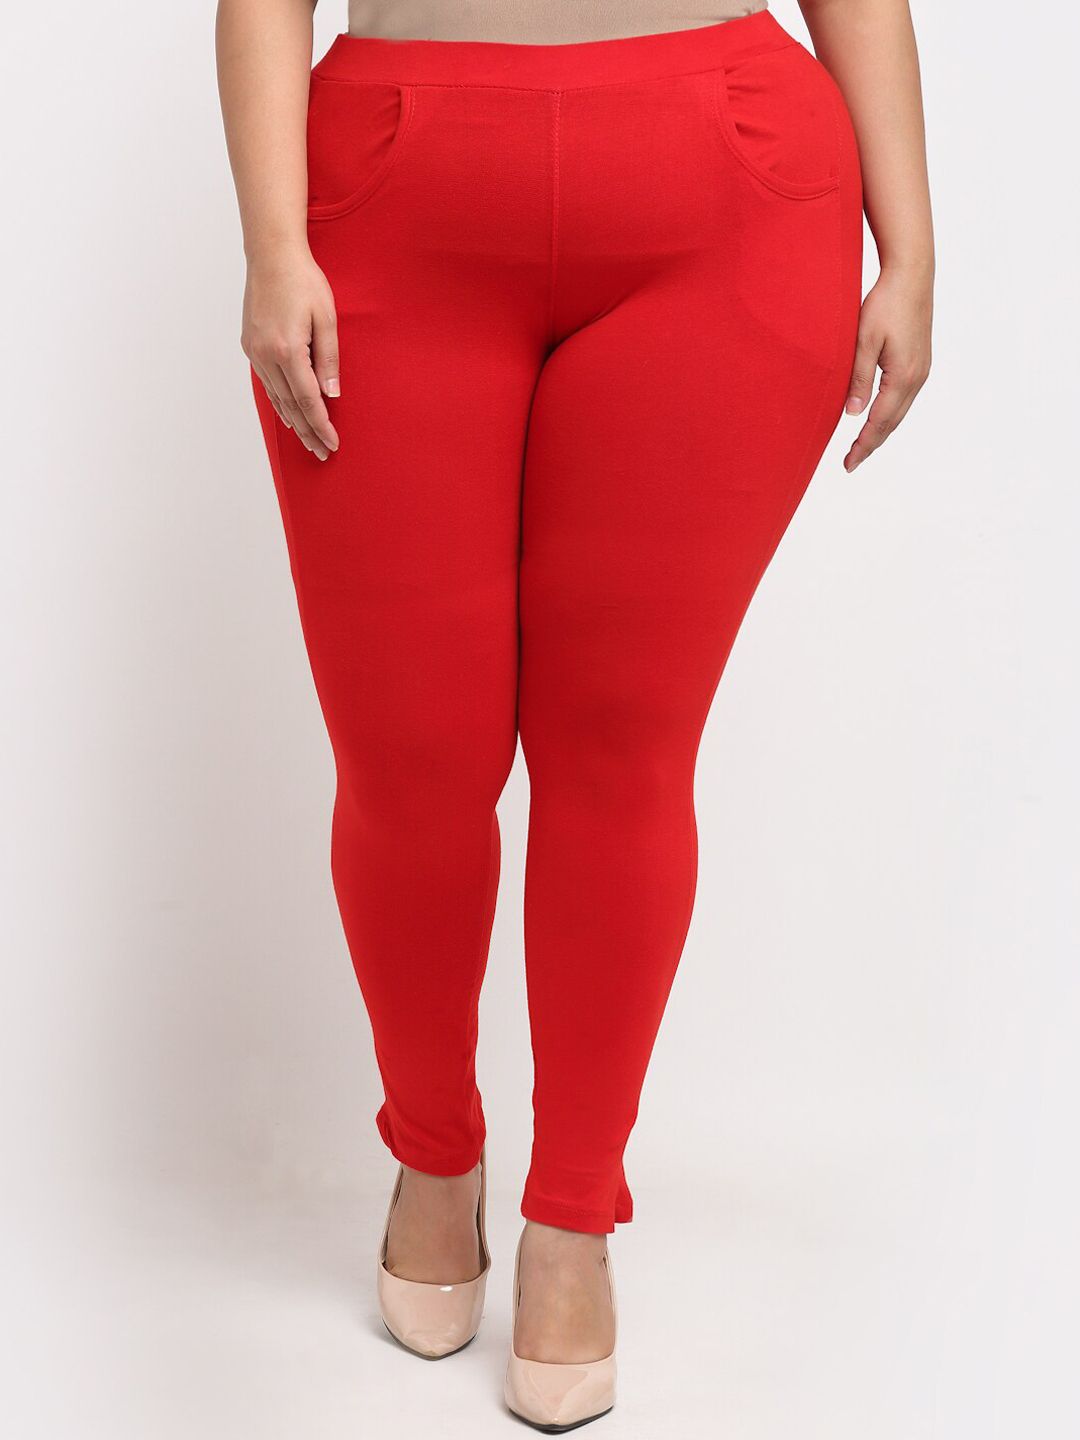 TAG 7 PLUS Women Plus Size Red Solid Ankle Length Leggings Price in India